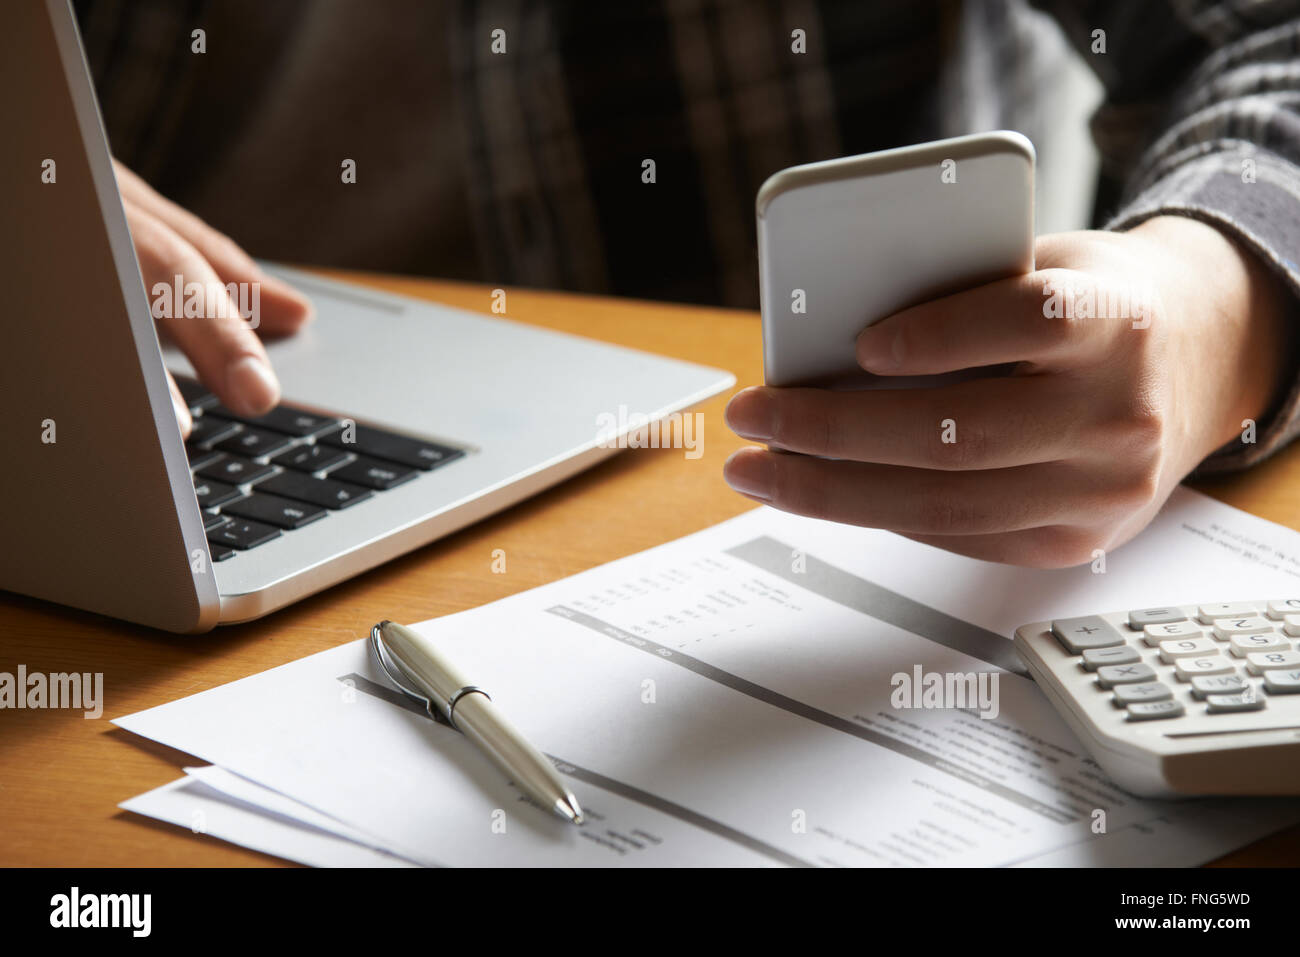 Man Doing On Line Banking And Finance At Home Stock Photo